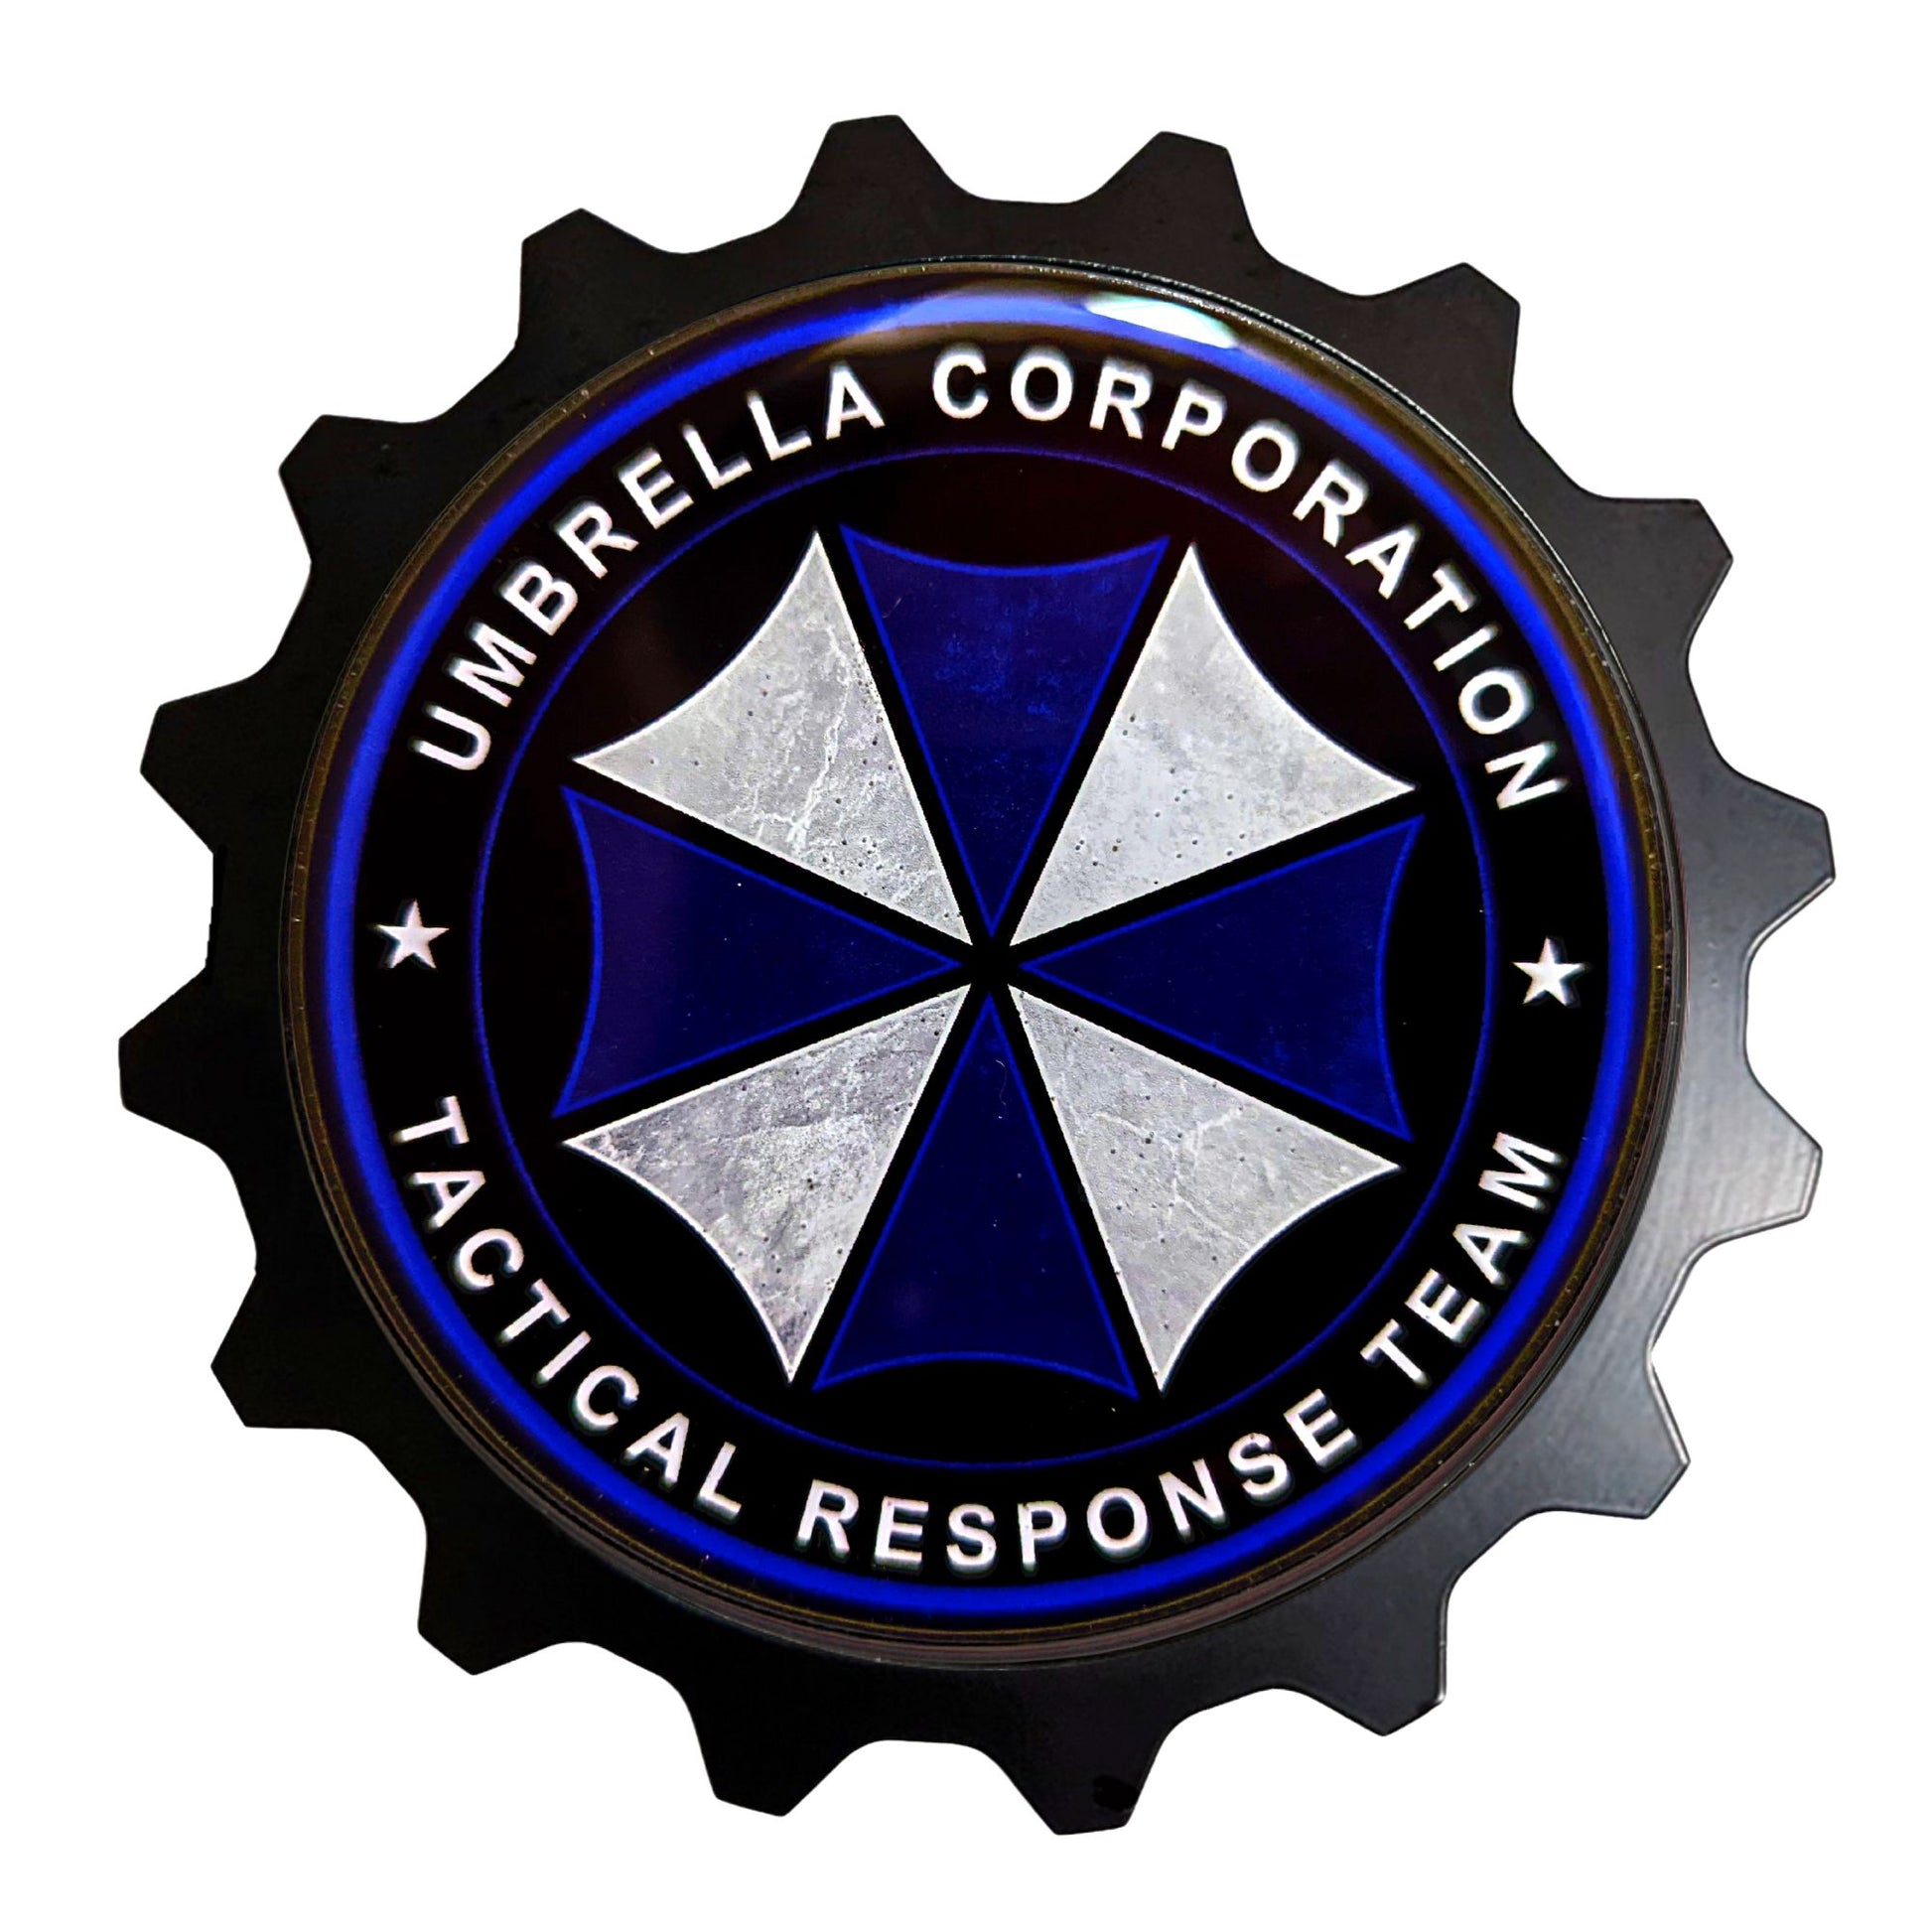 Blue team Umbrella Corp Group Fan Submitted Badge Resident Evil Fan Patch Emblem Decal 